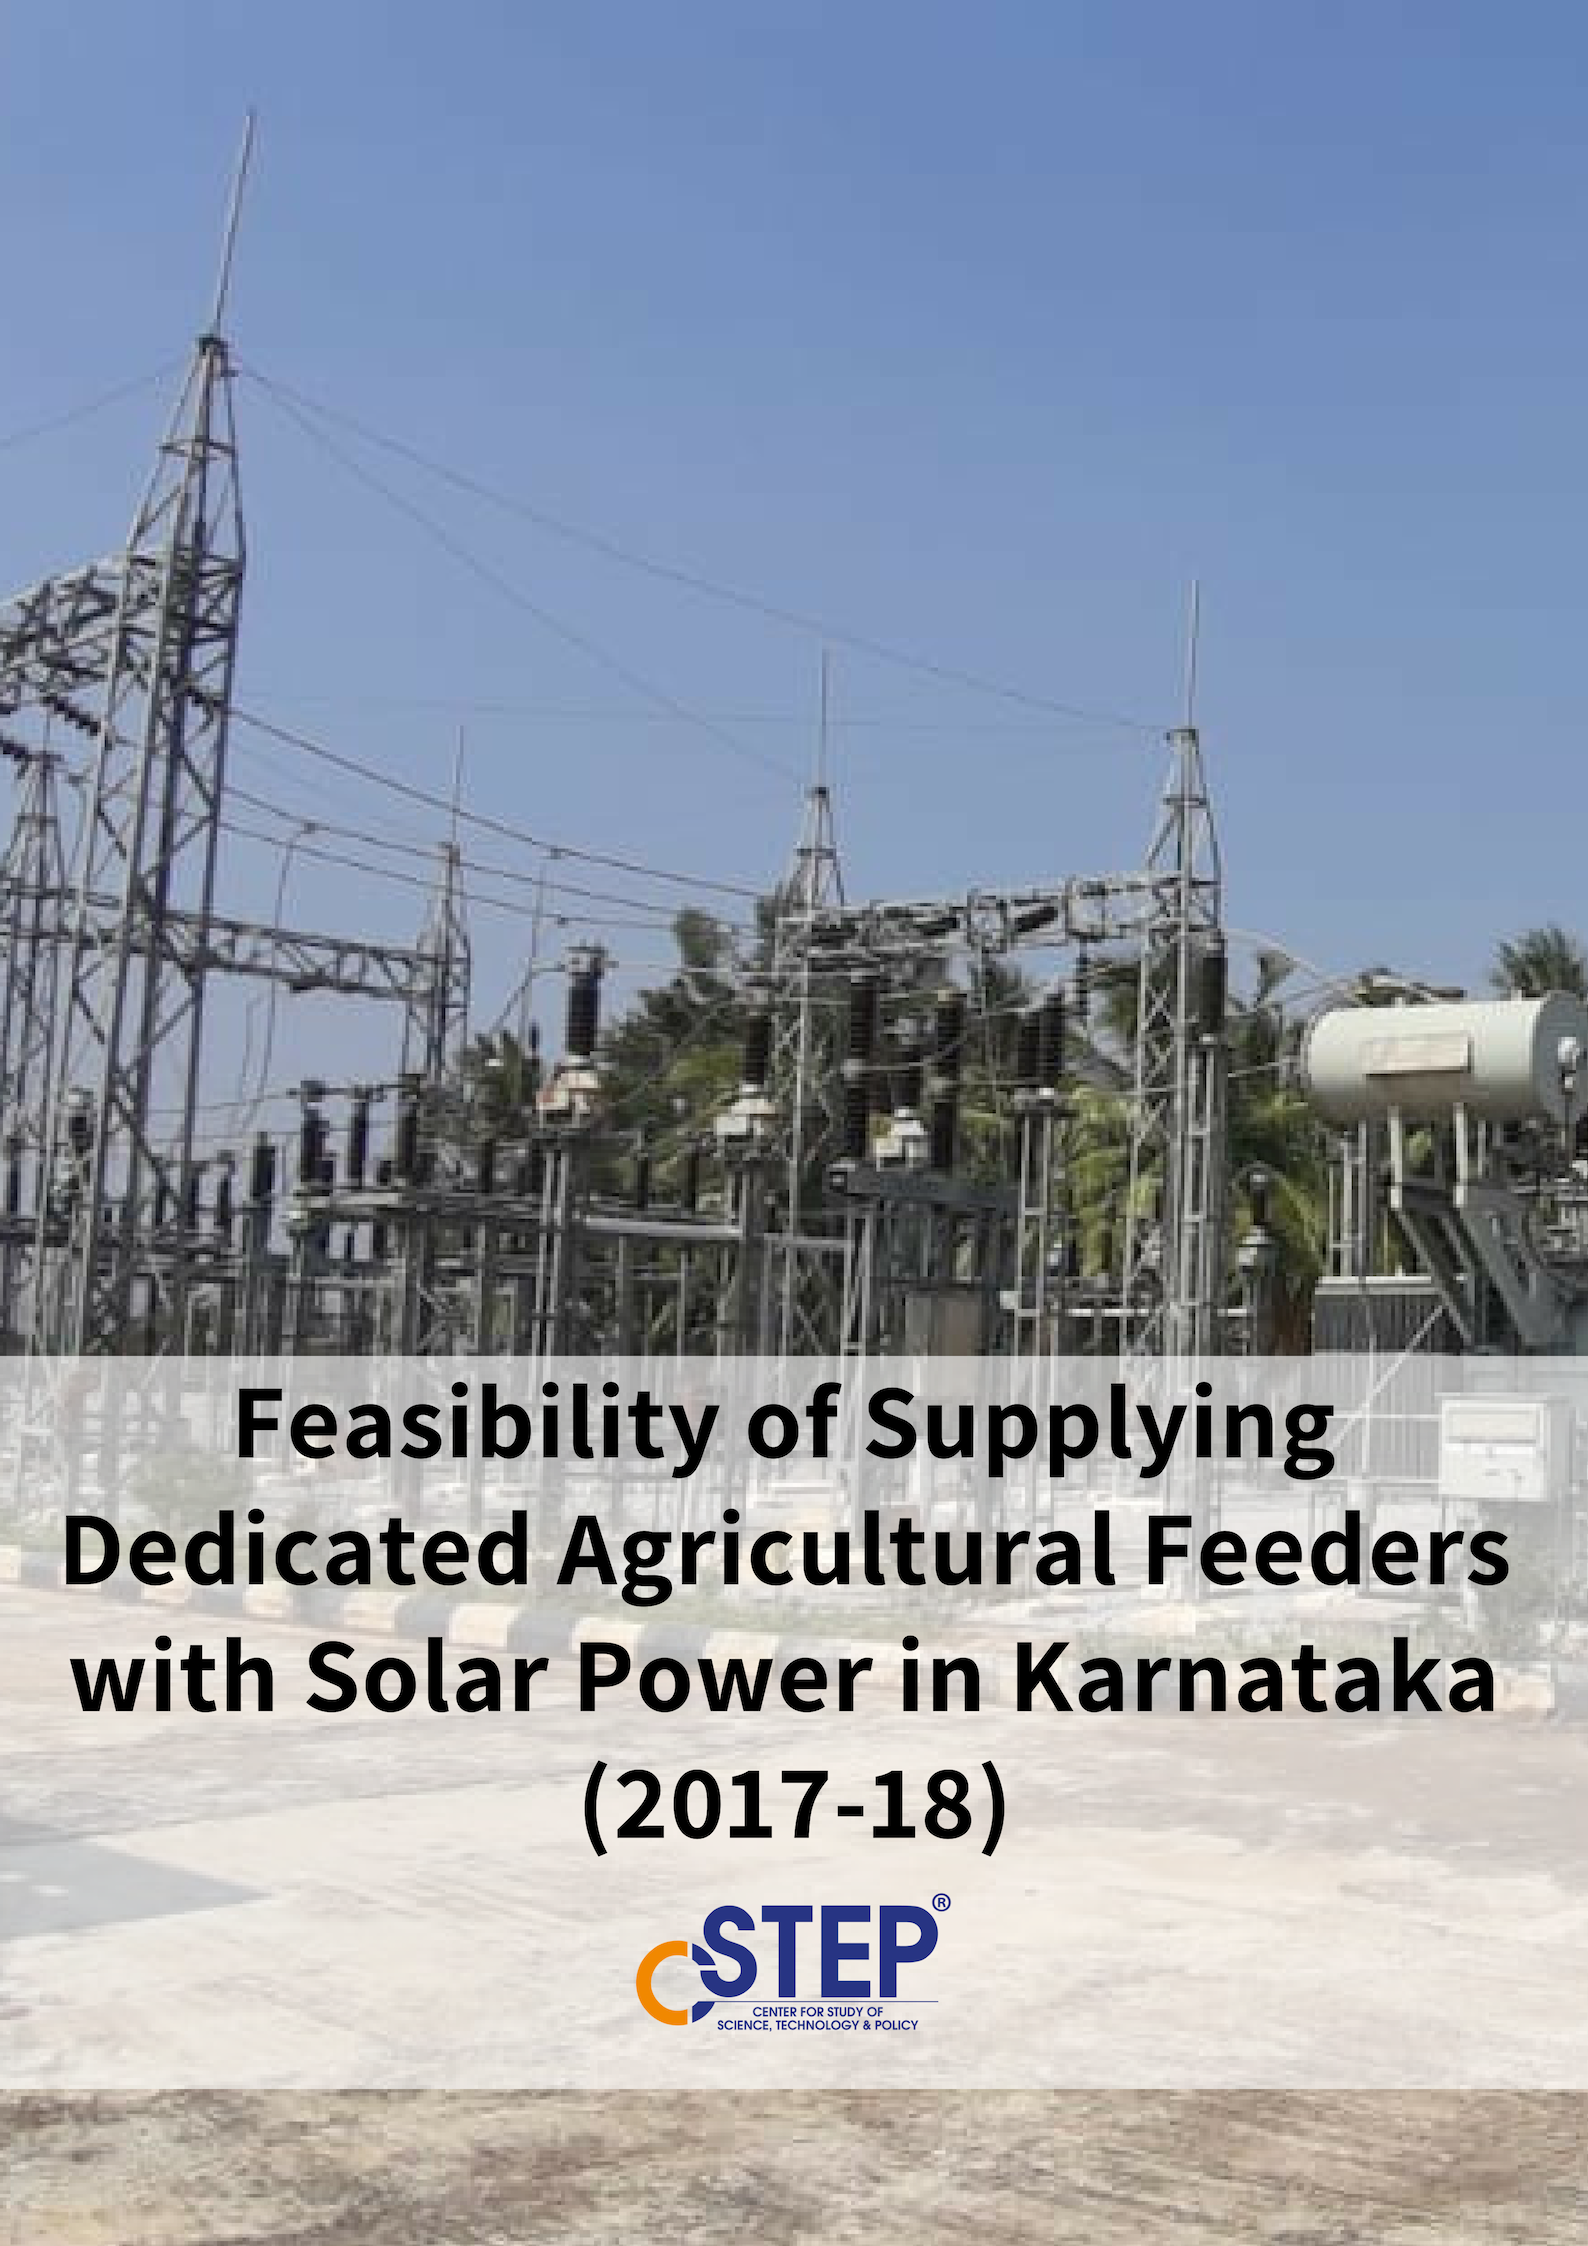 Feasibility of Supplying Dedicated Agricultural Feeders with Solar Power in Karnataka